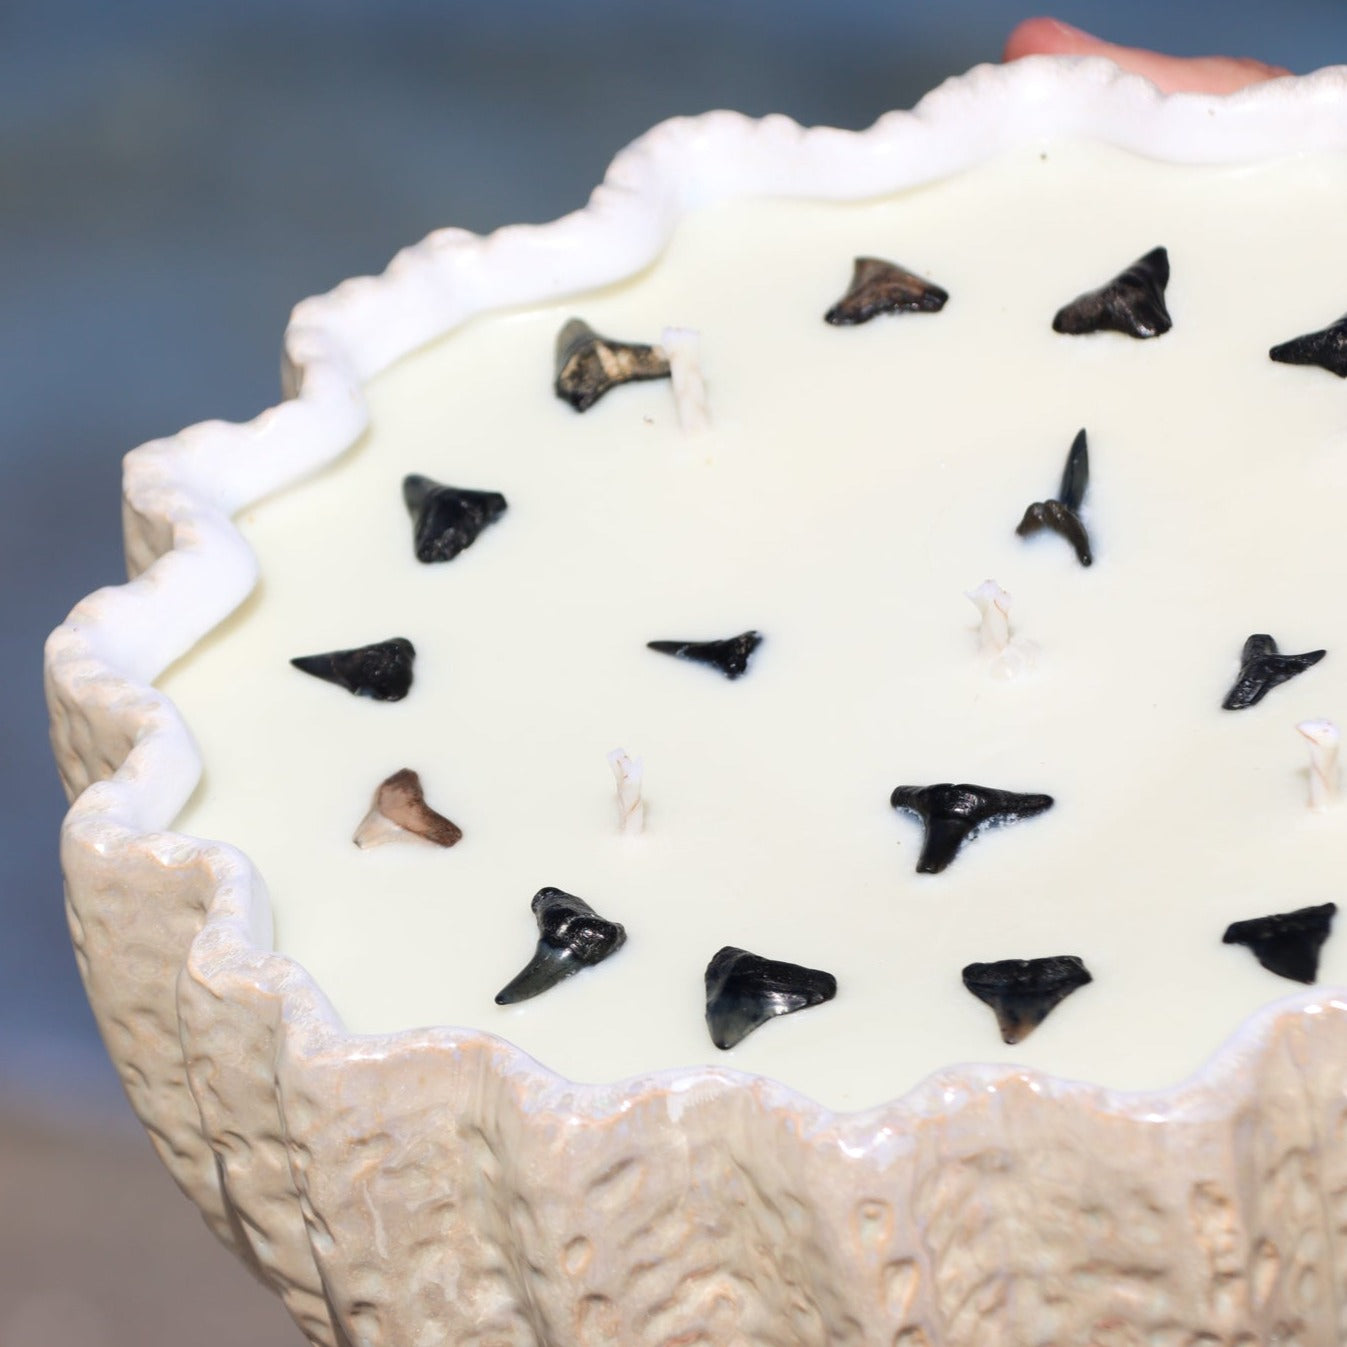 A close-up of Maya Bleu's shark tooth candle, featuring a natural soy wax blend and a real fossilized shark tooth embedded in the wax.